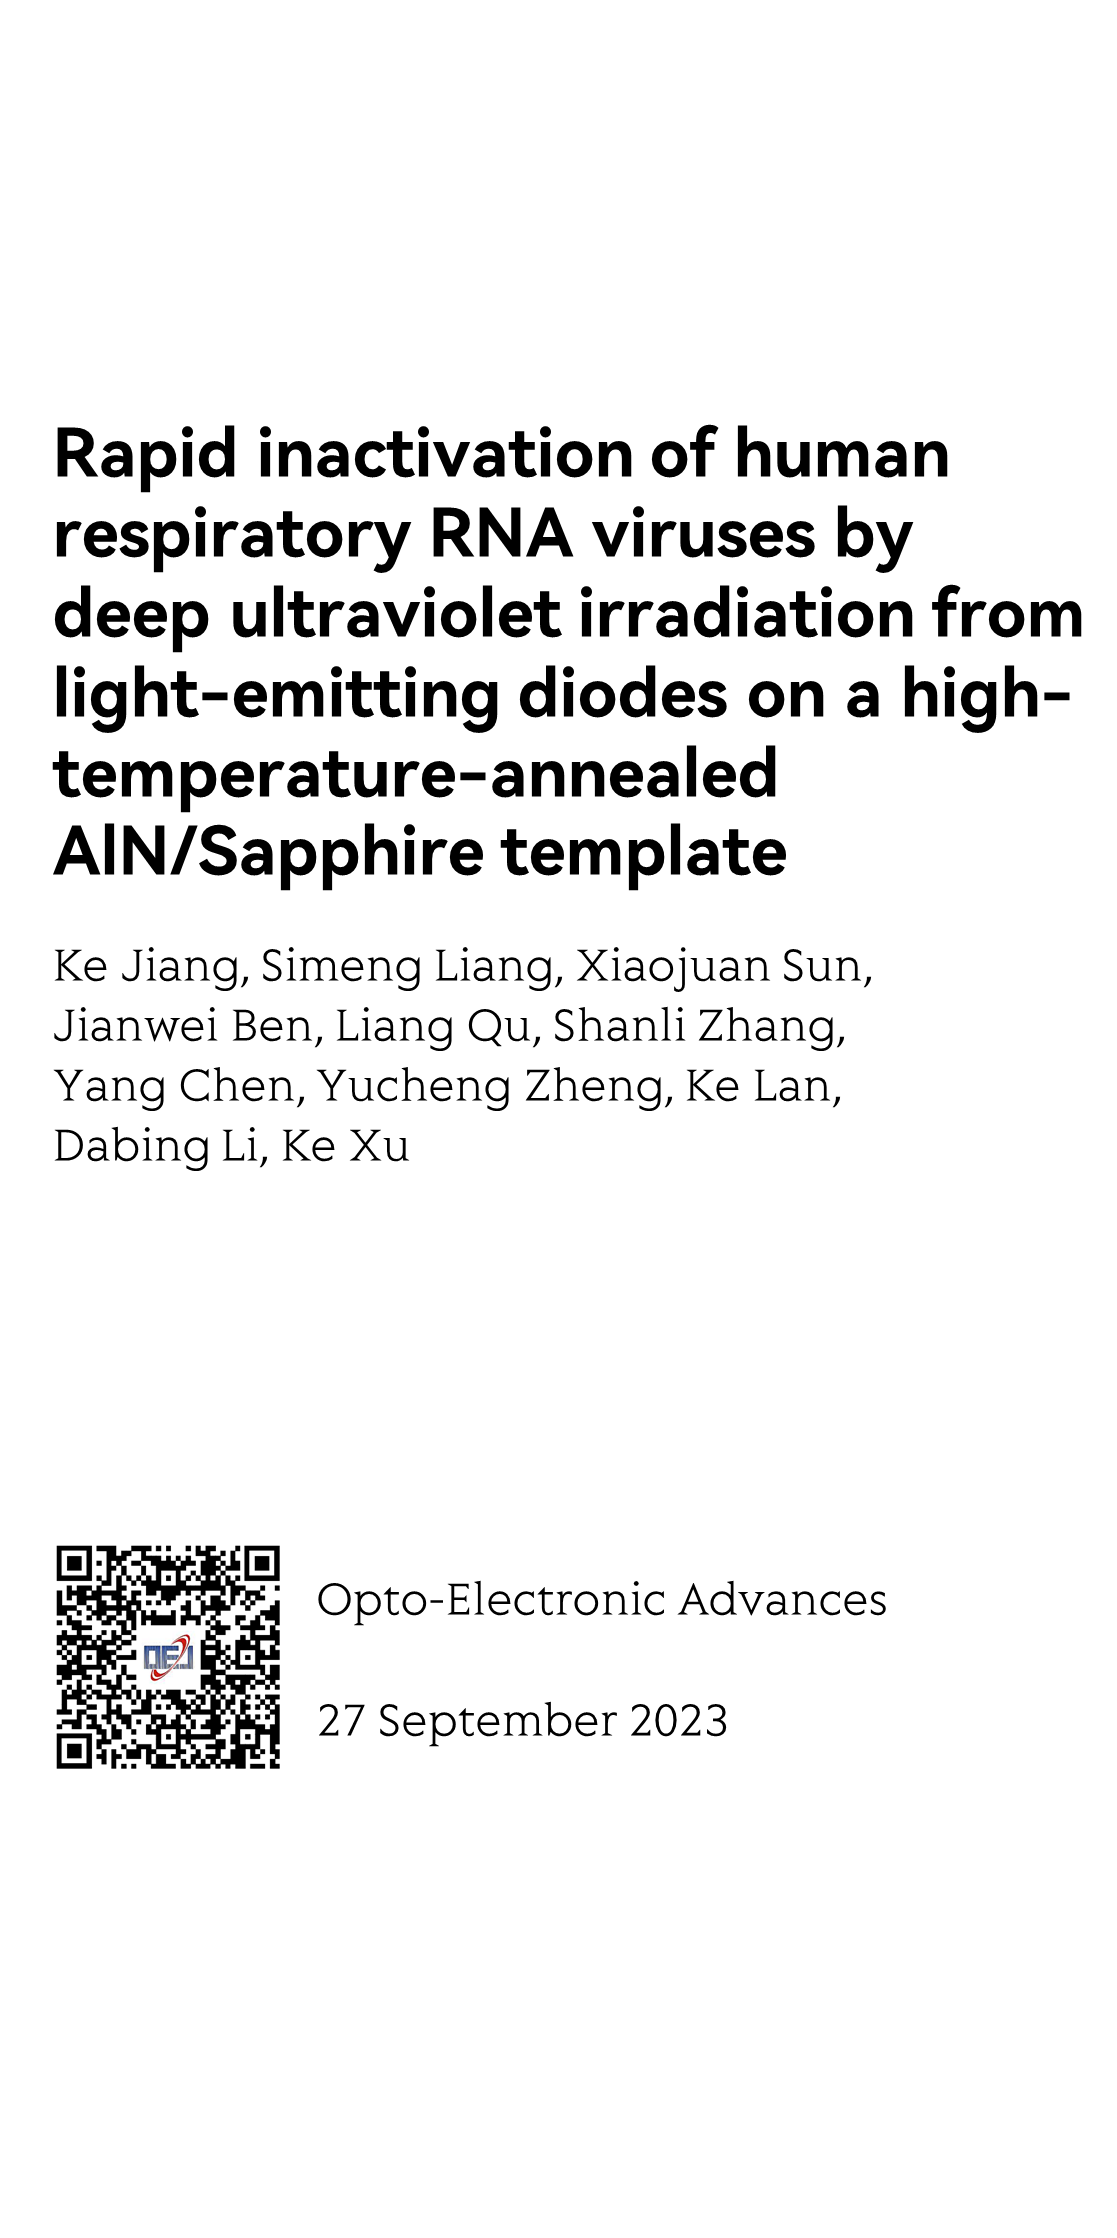 Rapid inactivation of human respiratory RNA viruses by deep ultraviolet irradiation from light-emitting diodes on a high-temperature-annealed AlN/Sapphire template_1